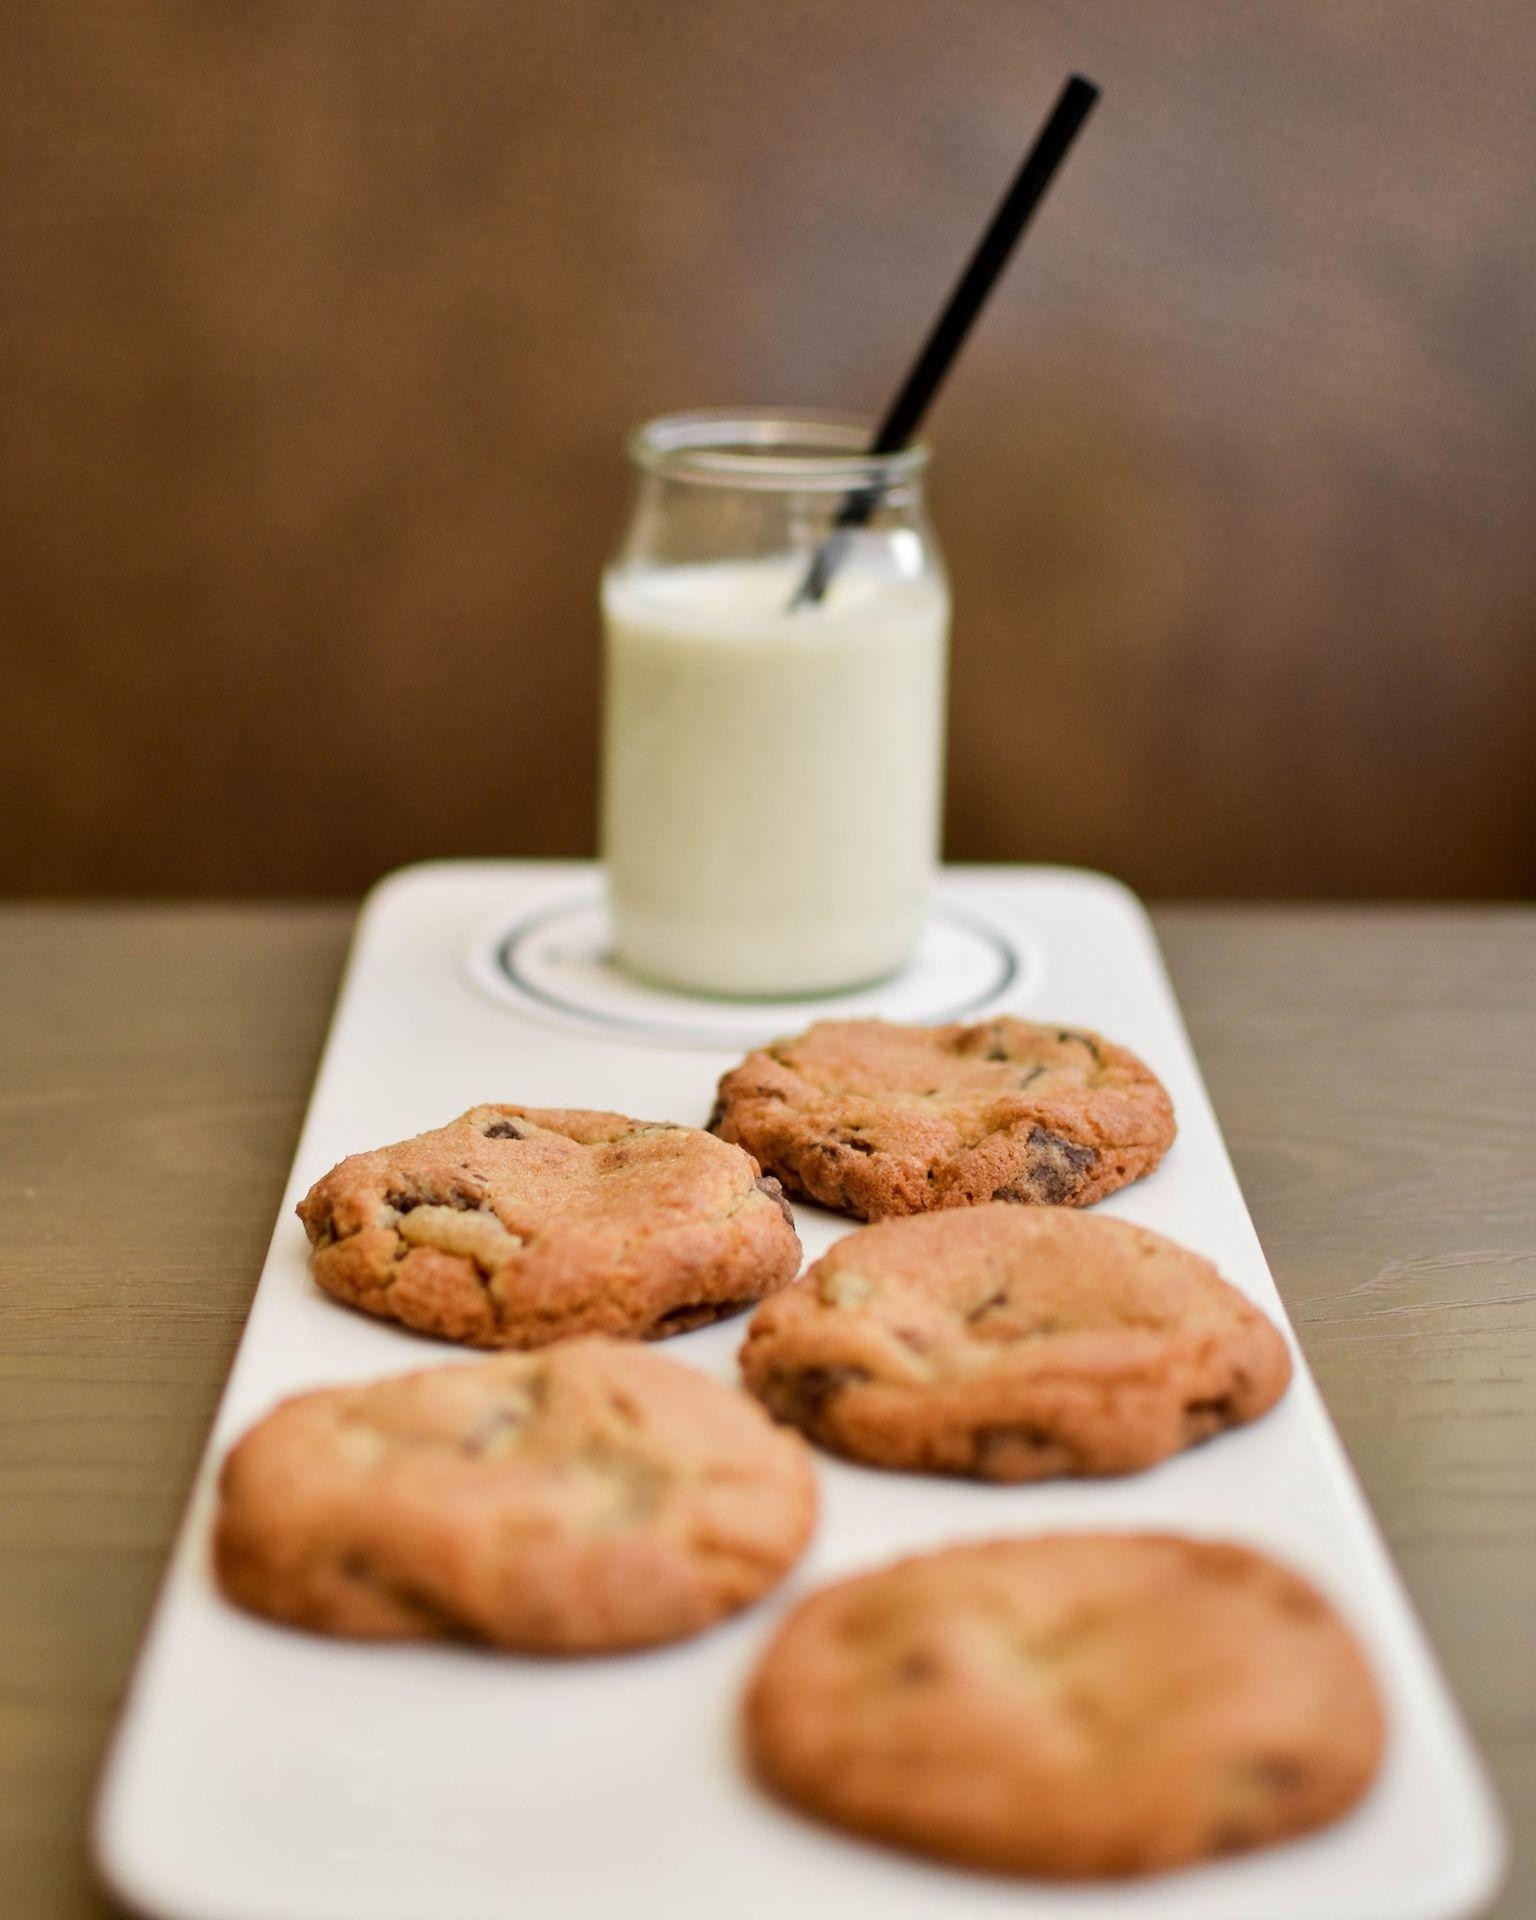 Mooo.... Chocolate Chip Cookies (without milk)